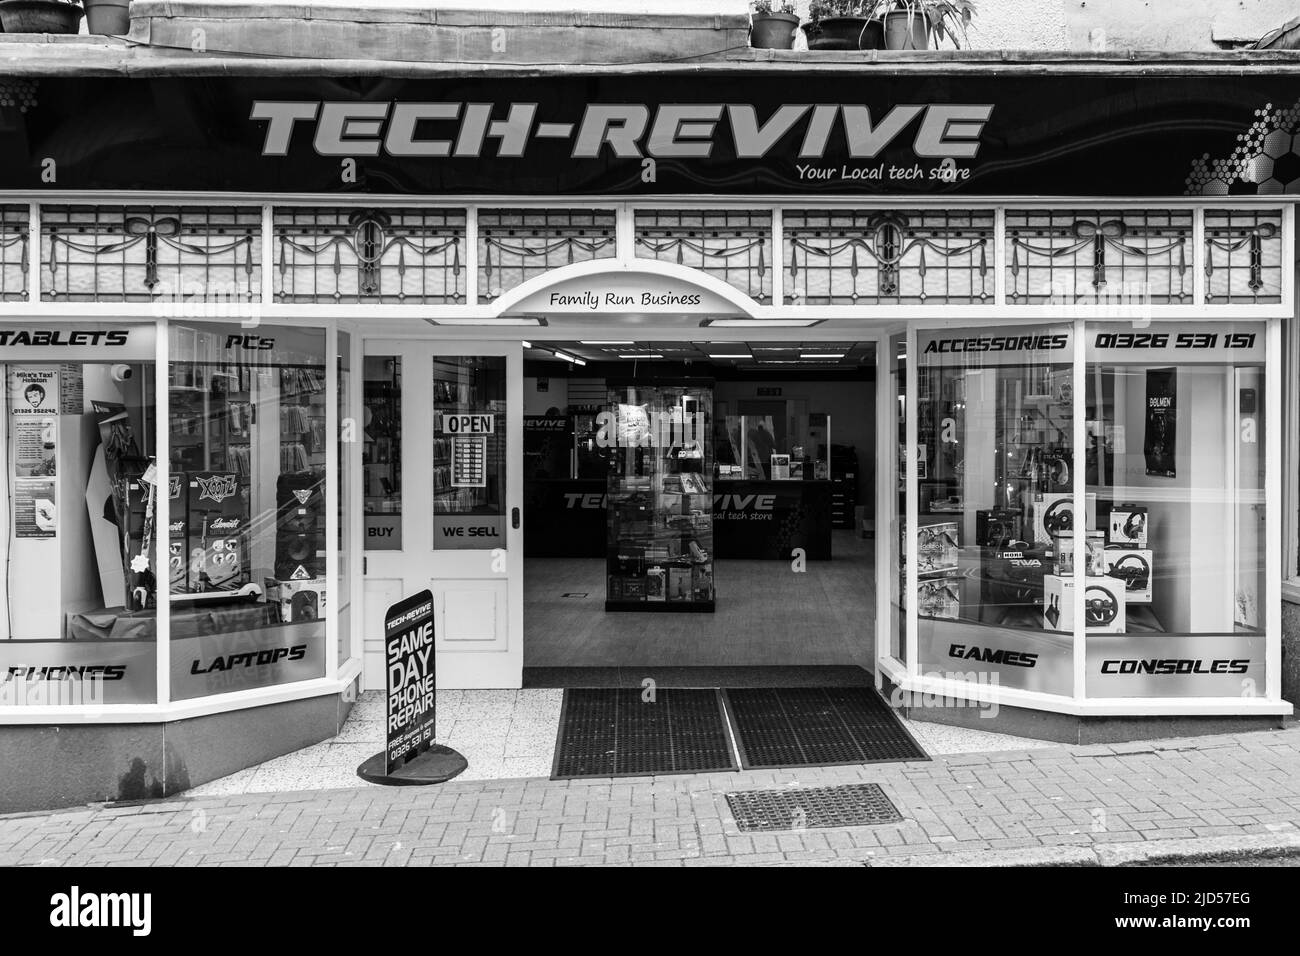 Retail outlets (Tech-Revive) in Meneage Street, Helston, Cornwall, England Stock Photo